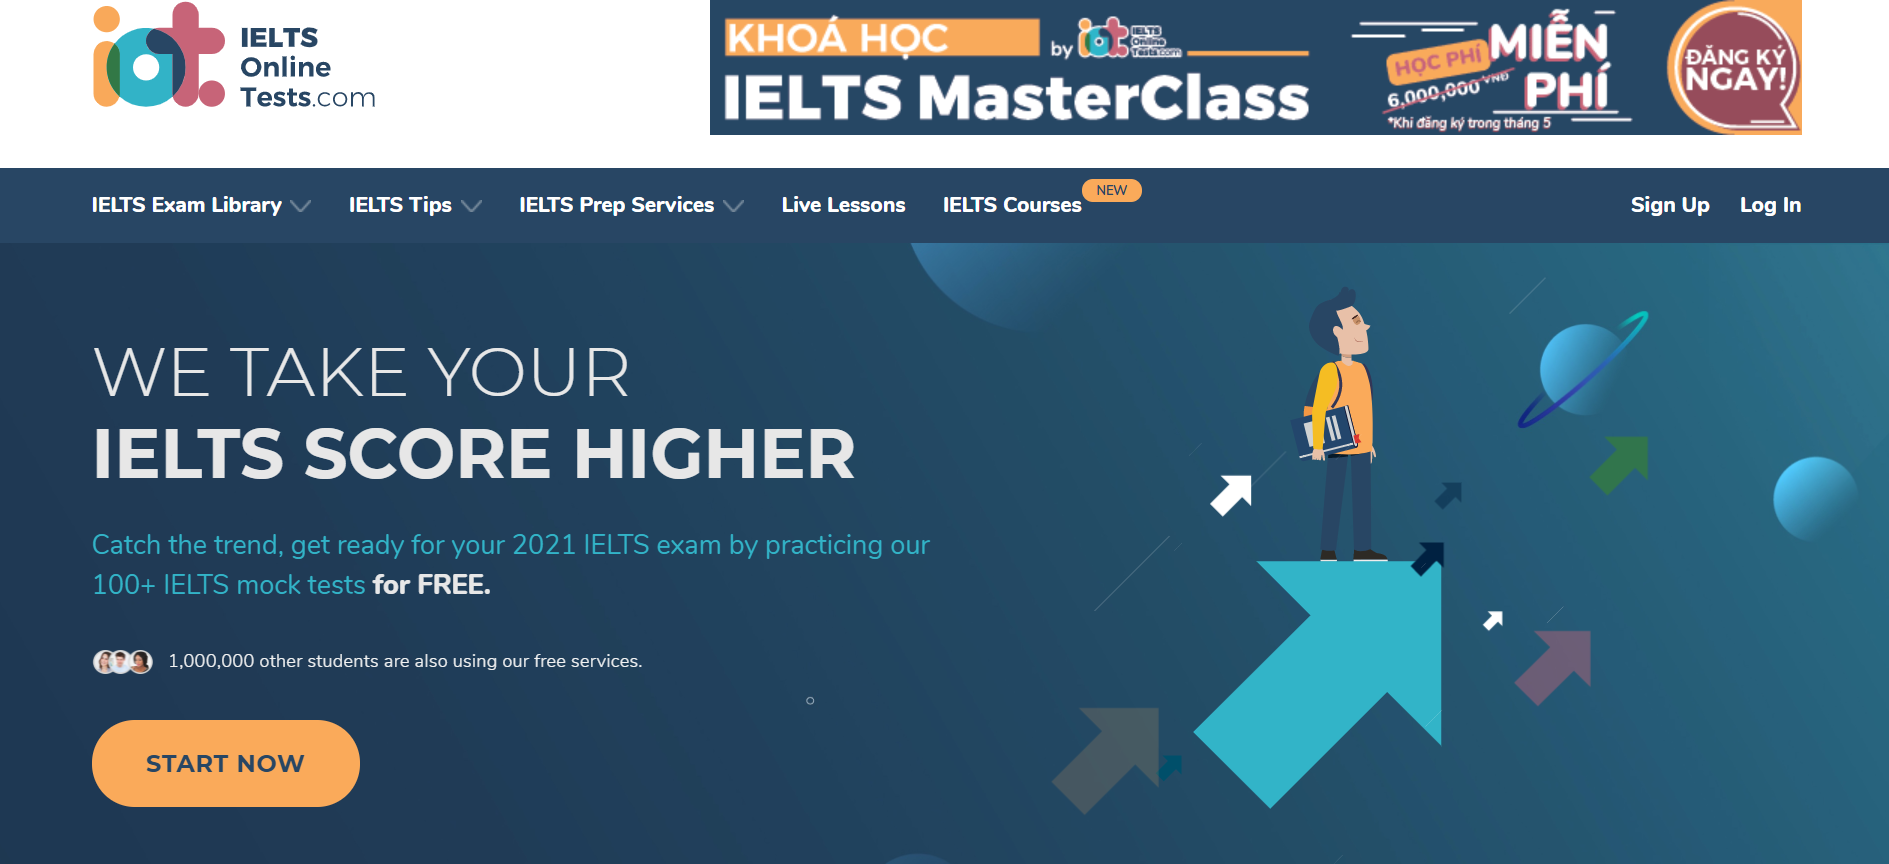 5-website-thi-thu-ielts-anh-2